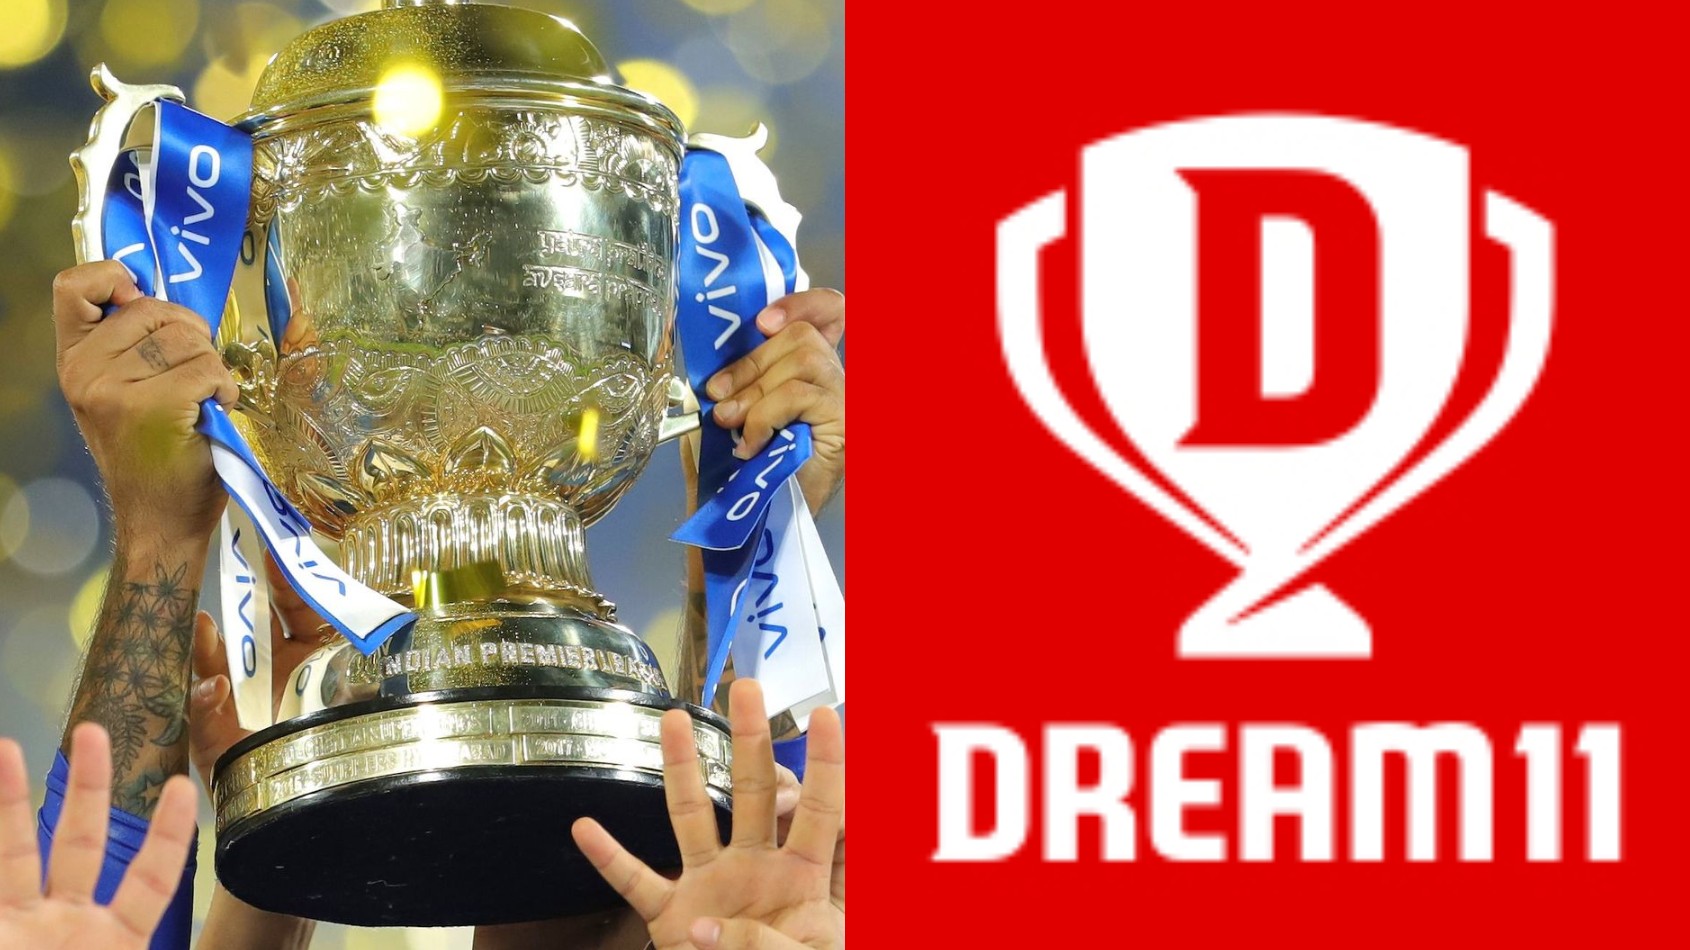 IPL 2020: ”Doesn’t respect Indian sentiments,” Traders body slams BCCI for announcing Dream11 as title sponsors